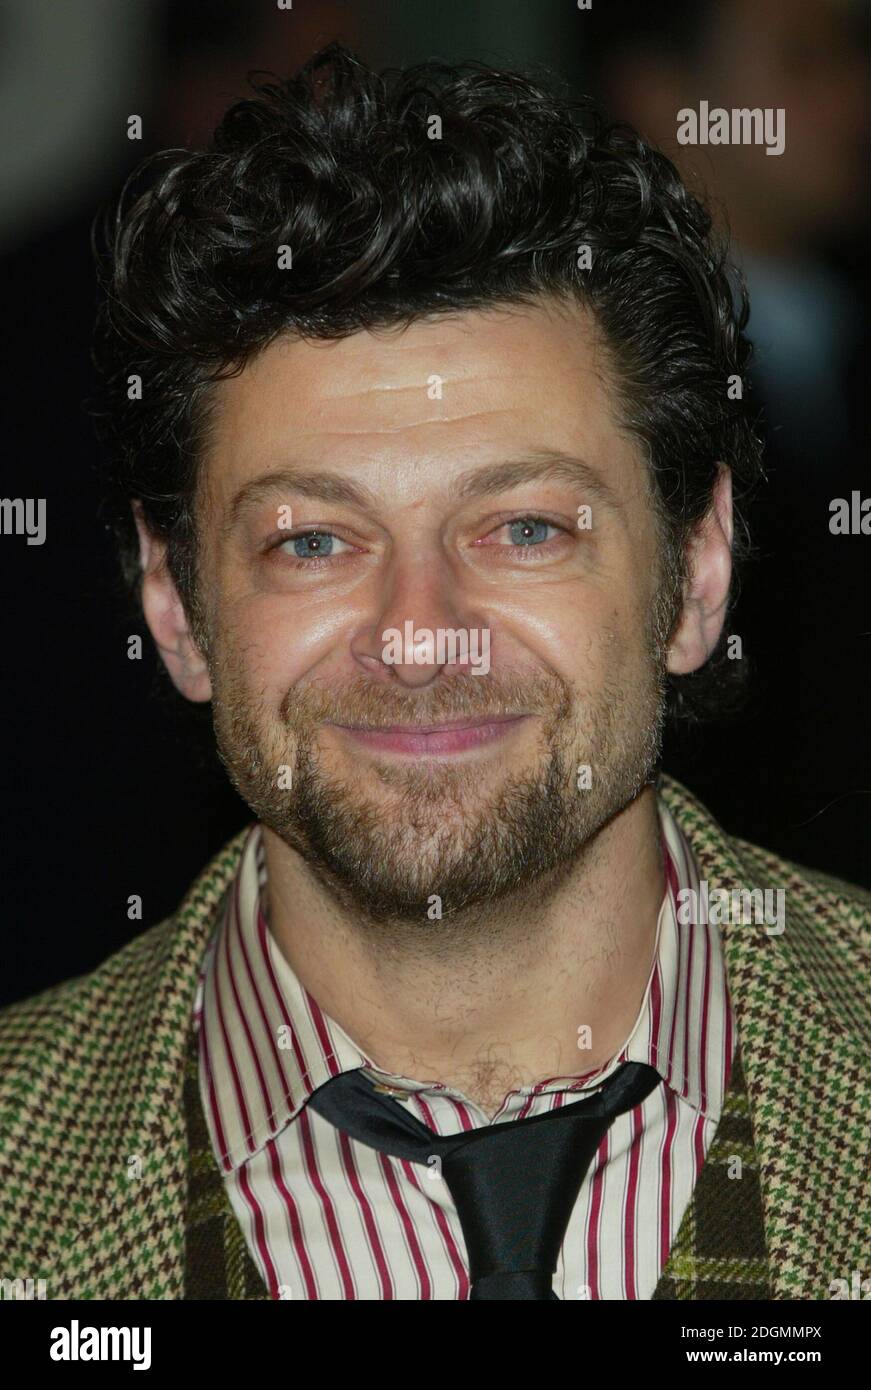 Andy Serkis arriving at the premiere of King Kong, Leicester Square, London. Â©Doug Peters/allactiondigital.com  Stock Photo